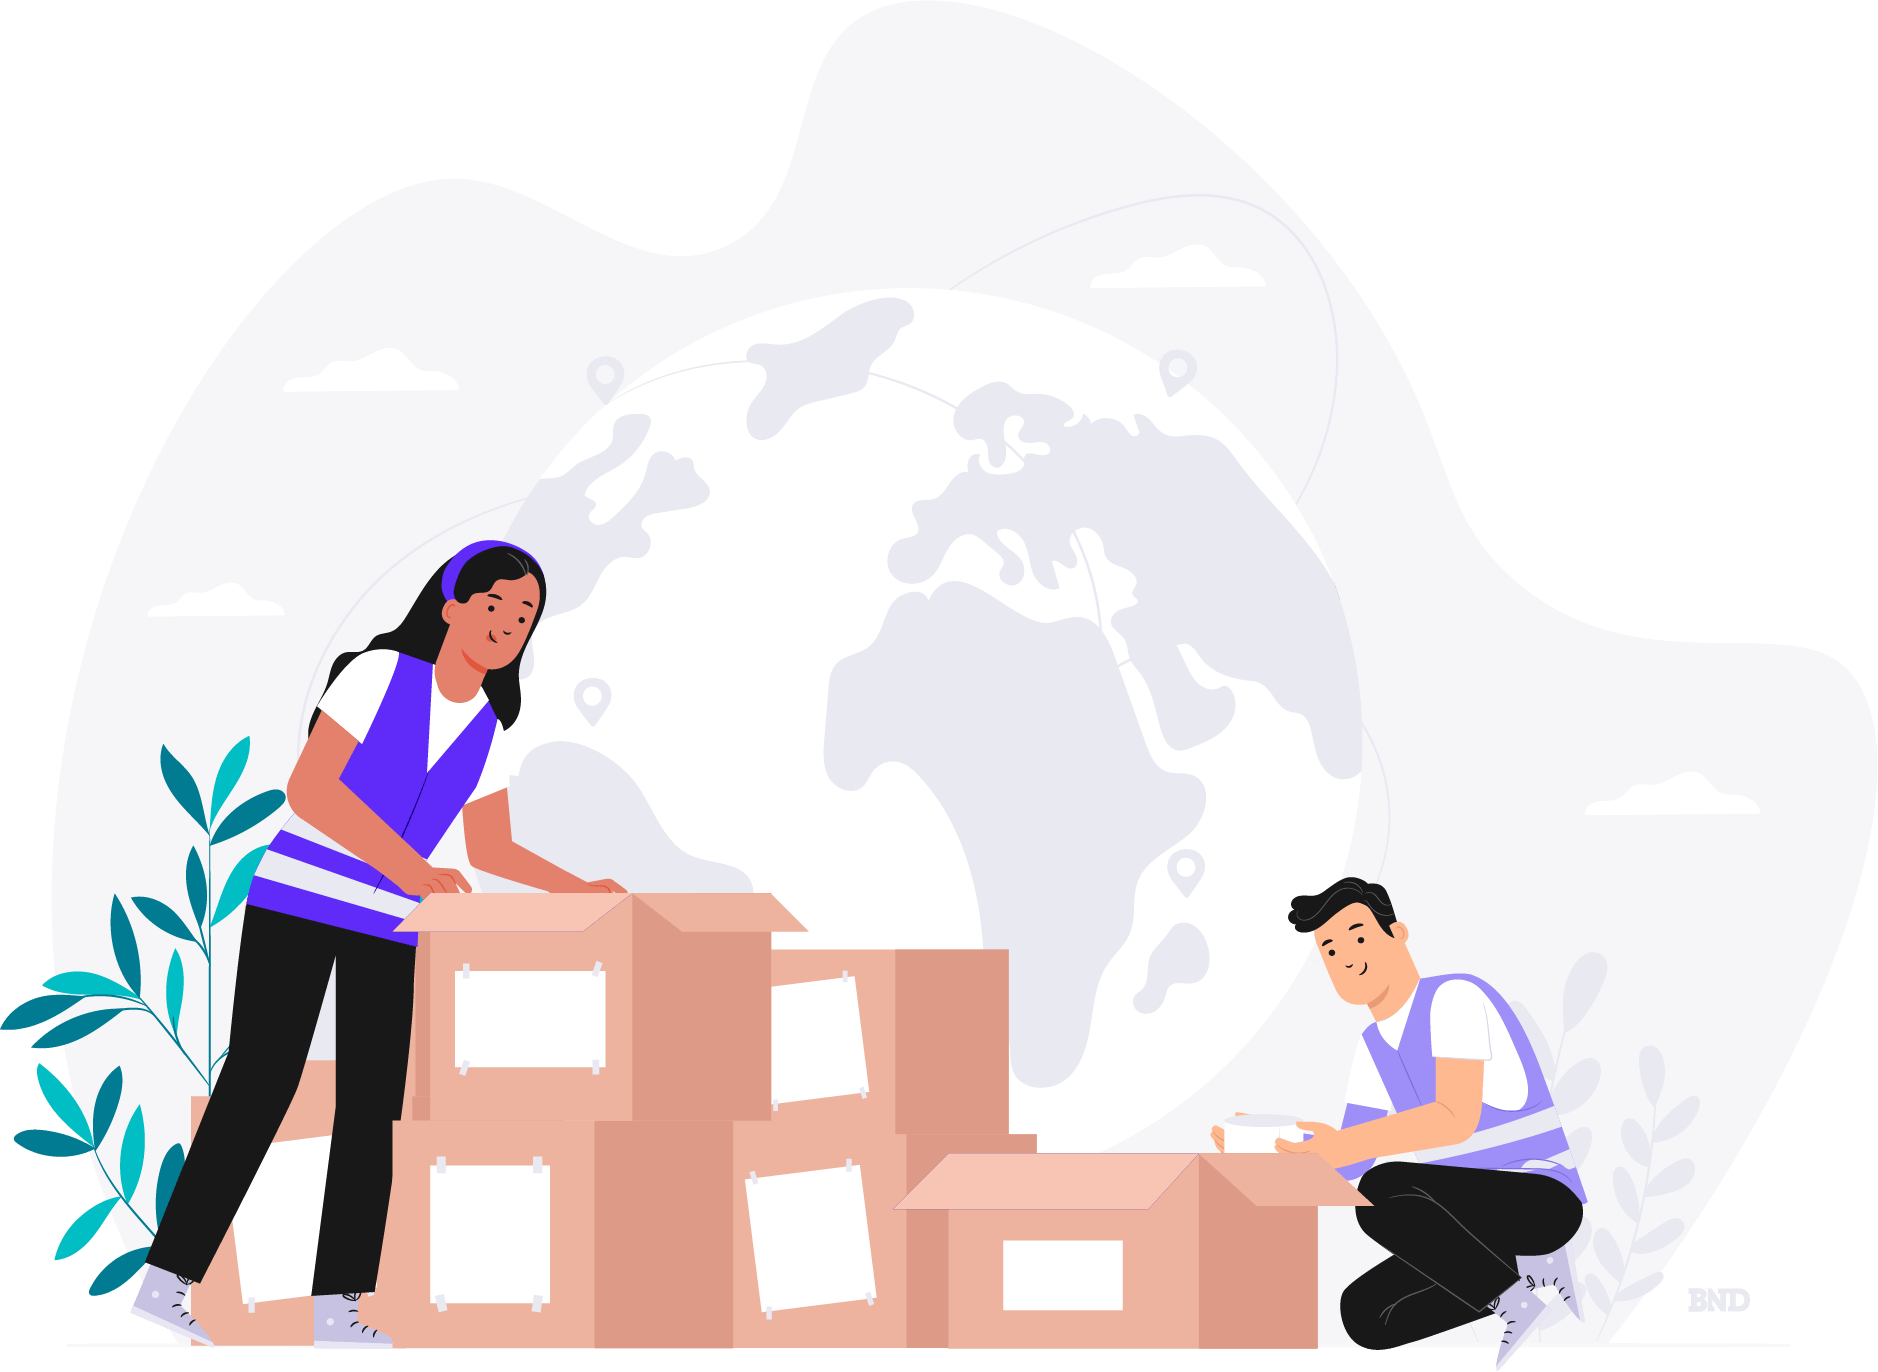 graphic of two colleagues putting items into cardboard boxes with an image of a globe in the background